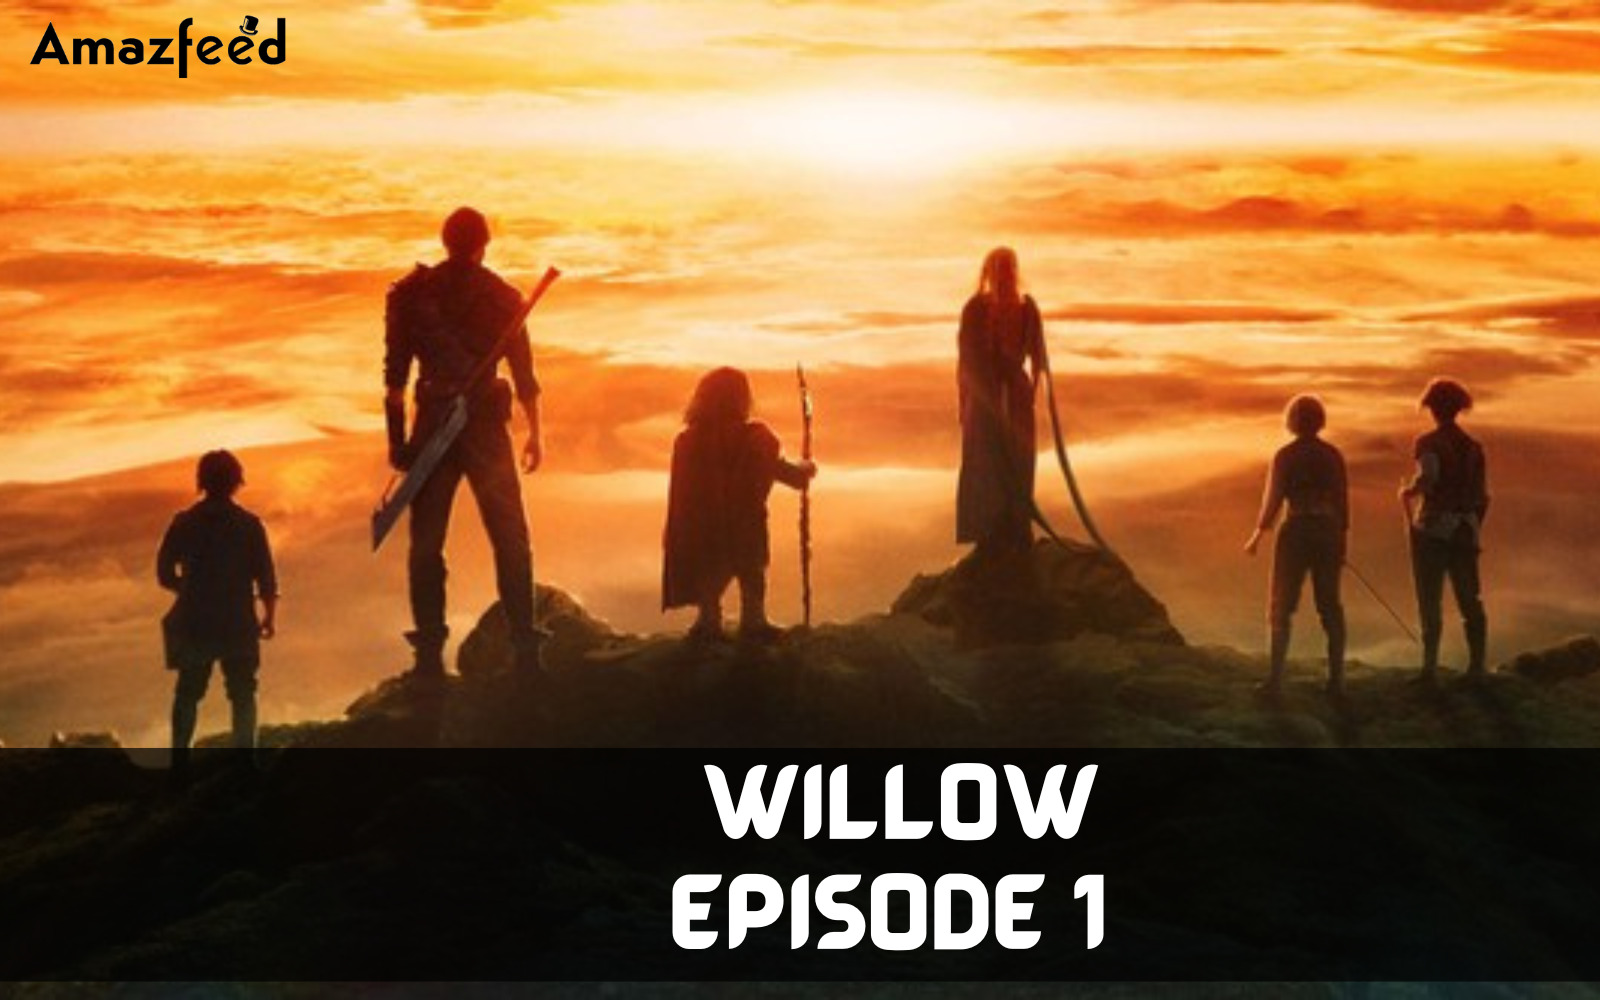 Willow Episode 1 Release date